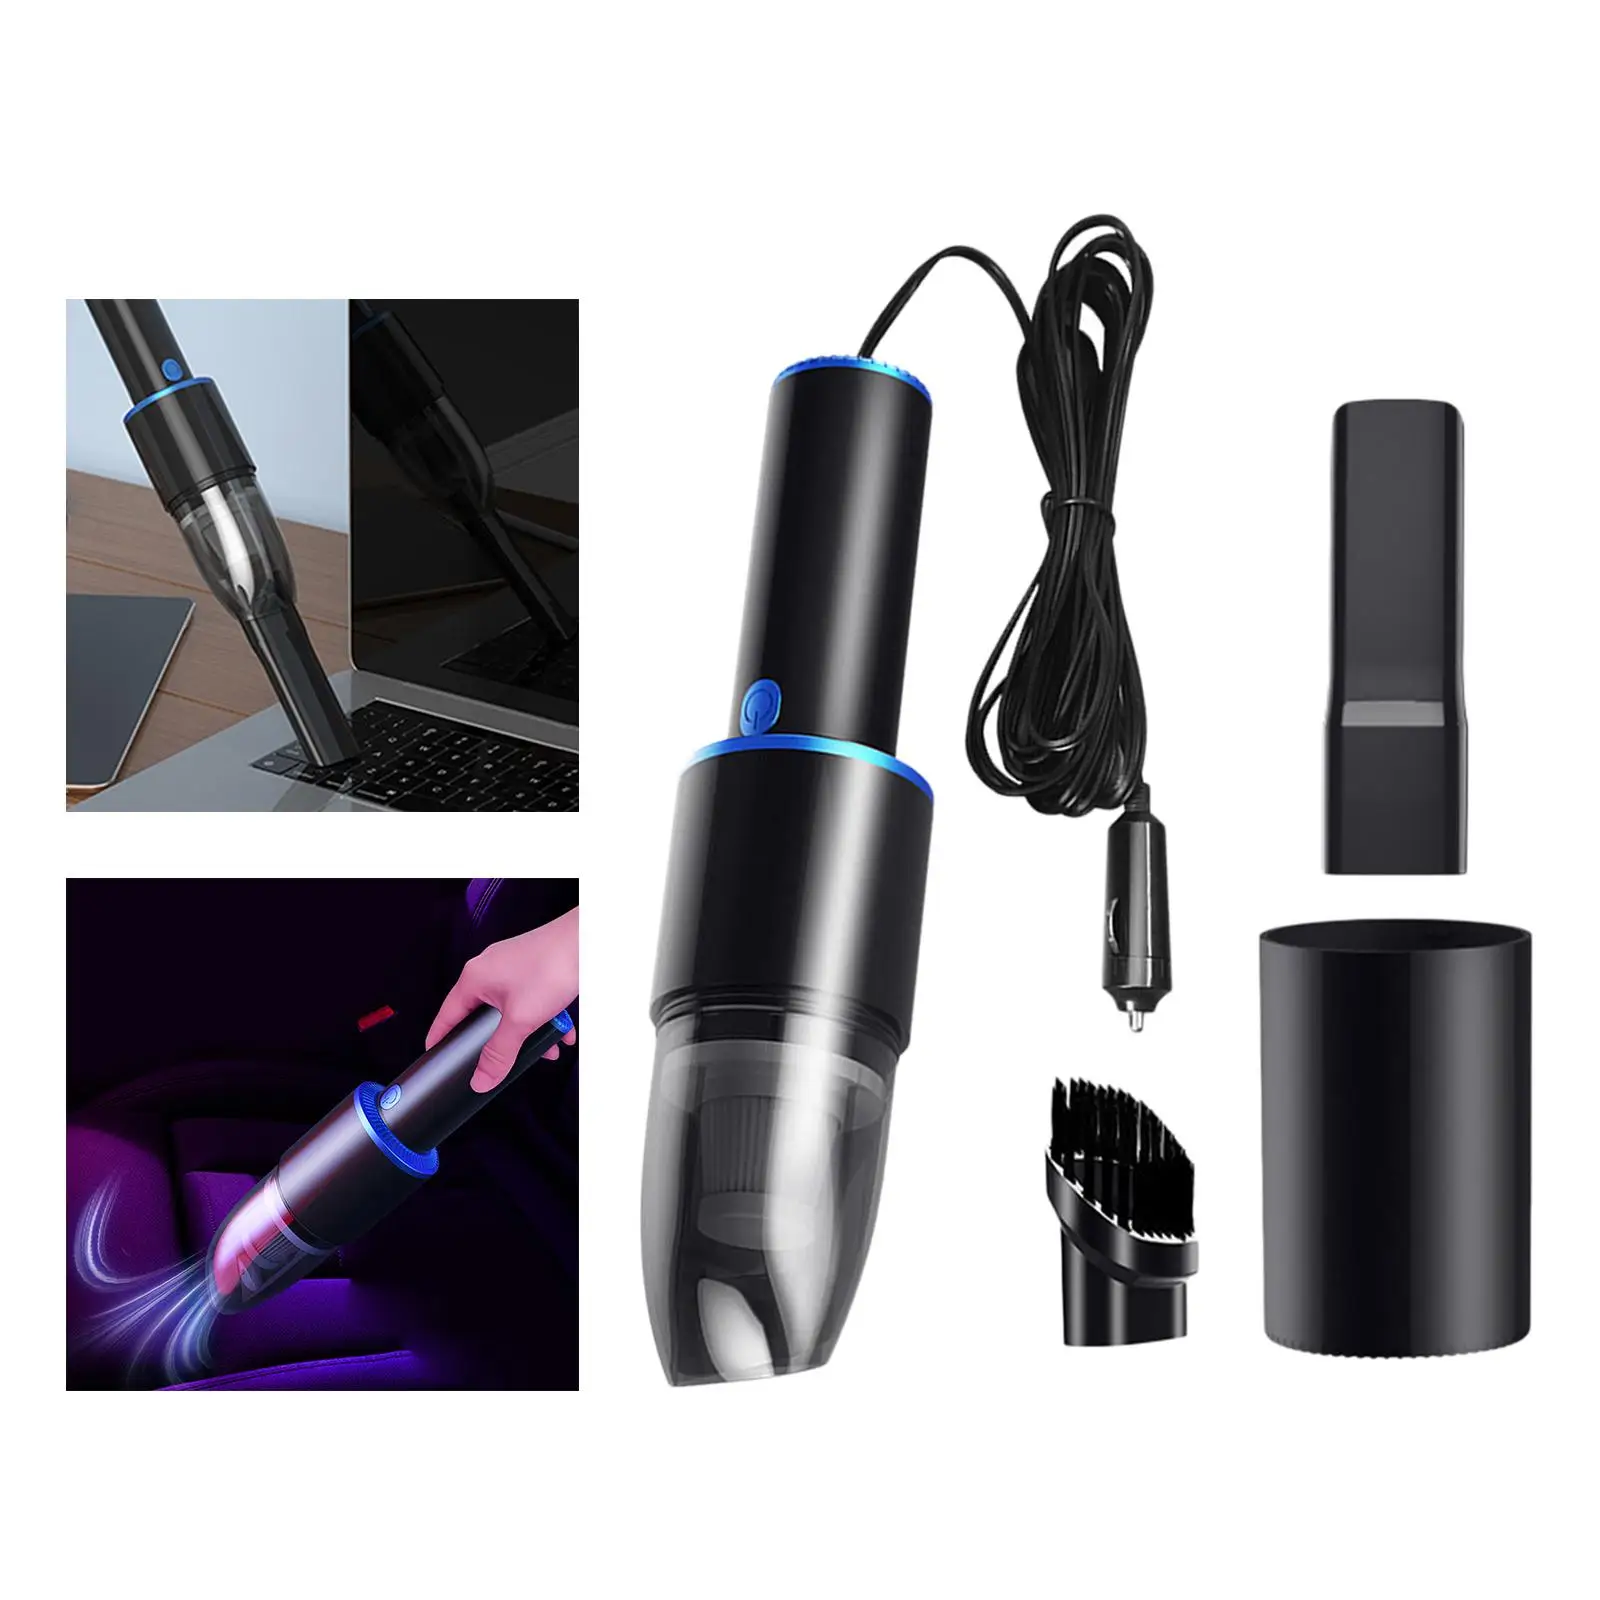 Handheld Car Vacuum Cleaner 10000PA Low Noise Vacuum Cleaning 2 Nozzles CyclSuction Fit for Home Use Chairs Seats Supplies 